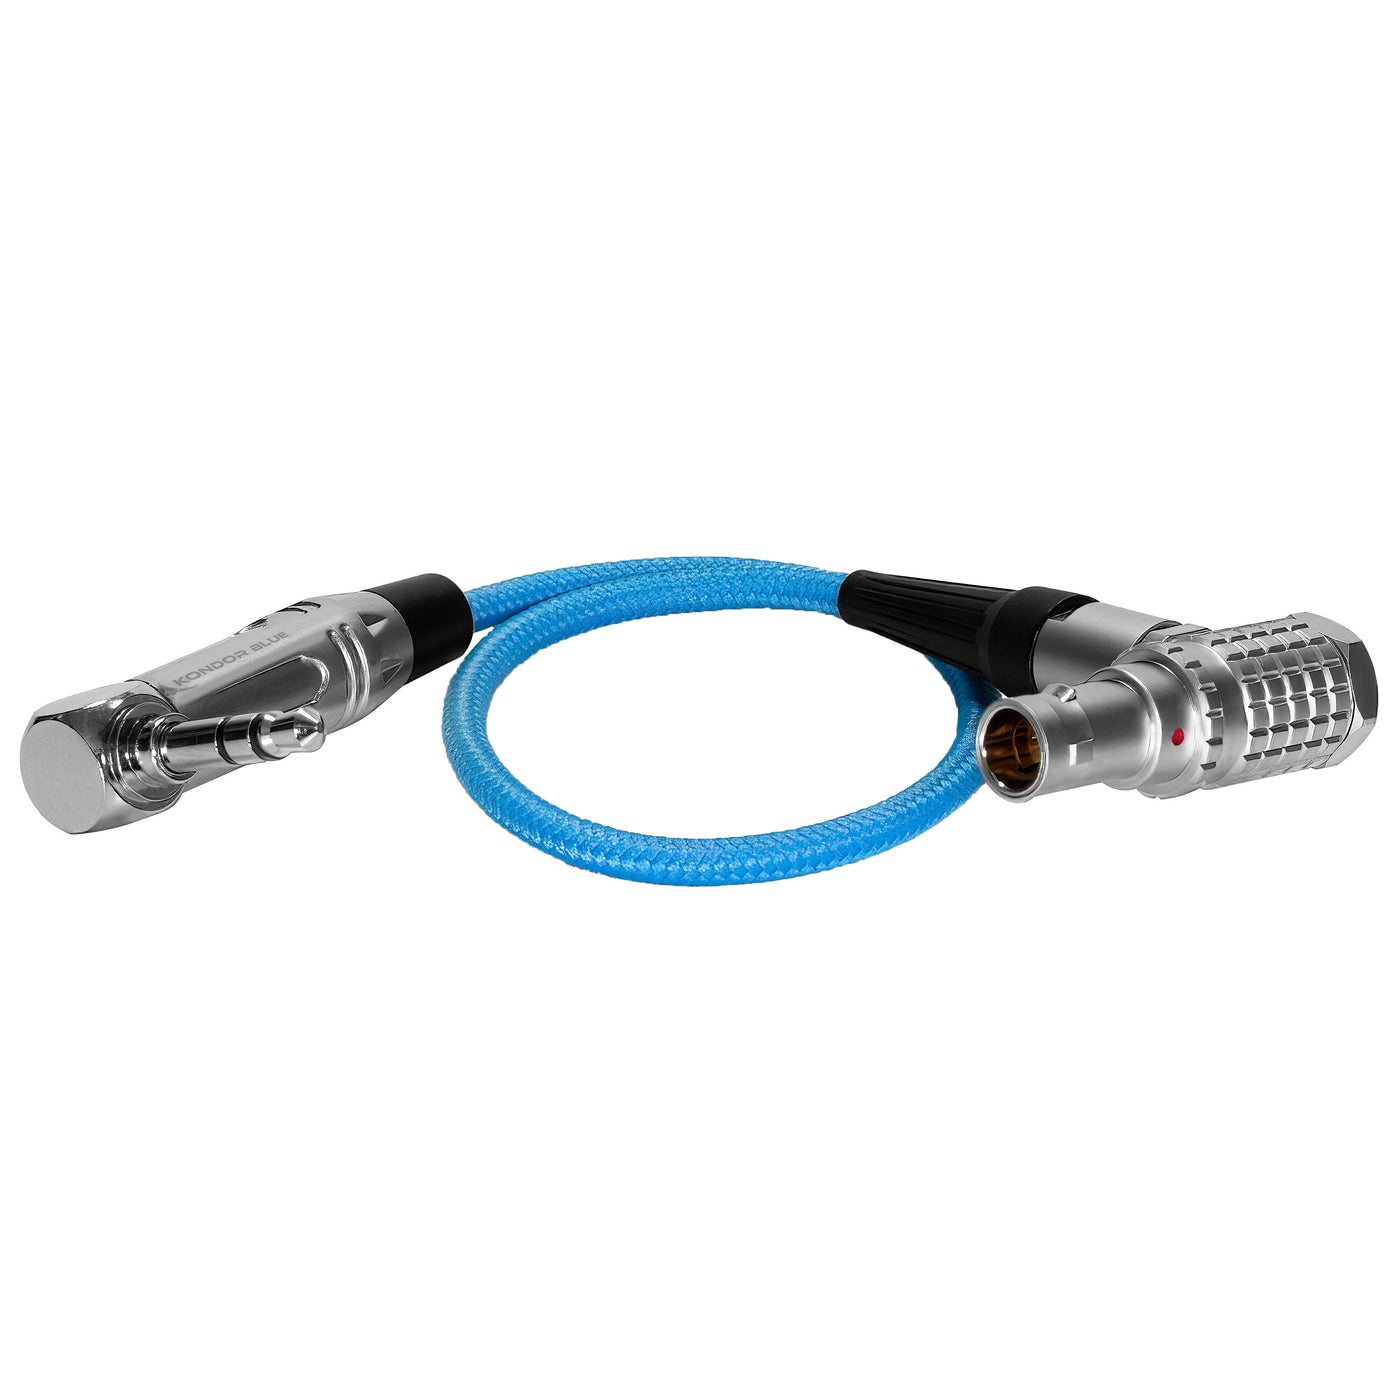 10" EXT LEMO 9 Pin to 3.5mm Right Angle Time Code Cable for Komodo/Raptor